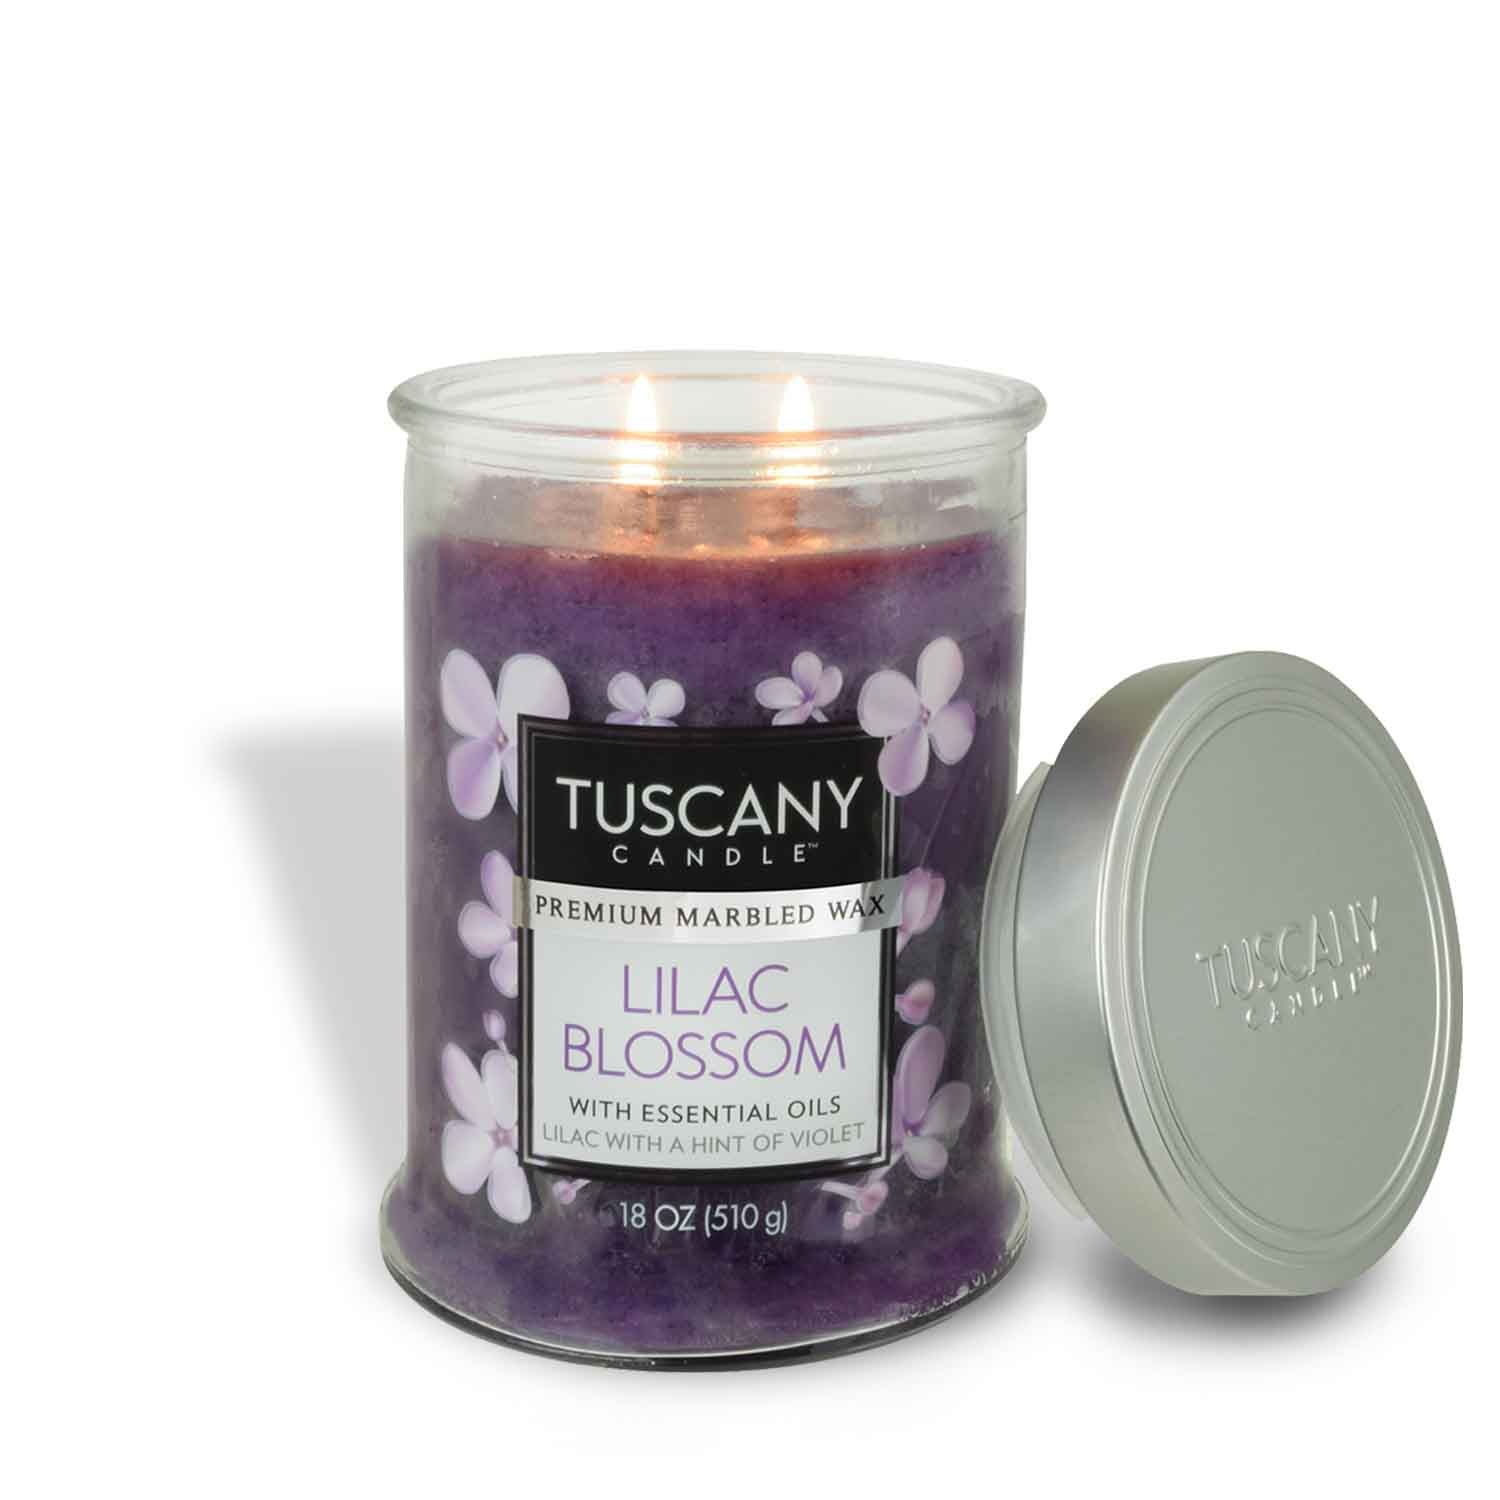 Lilac Blossom - One of our most popular springtime scented candles